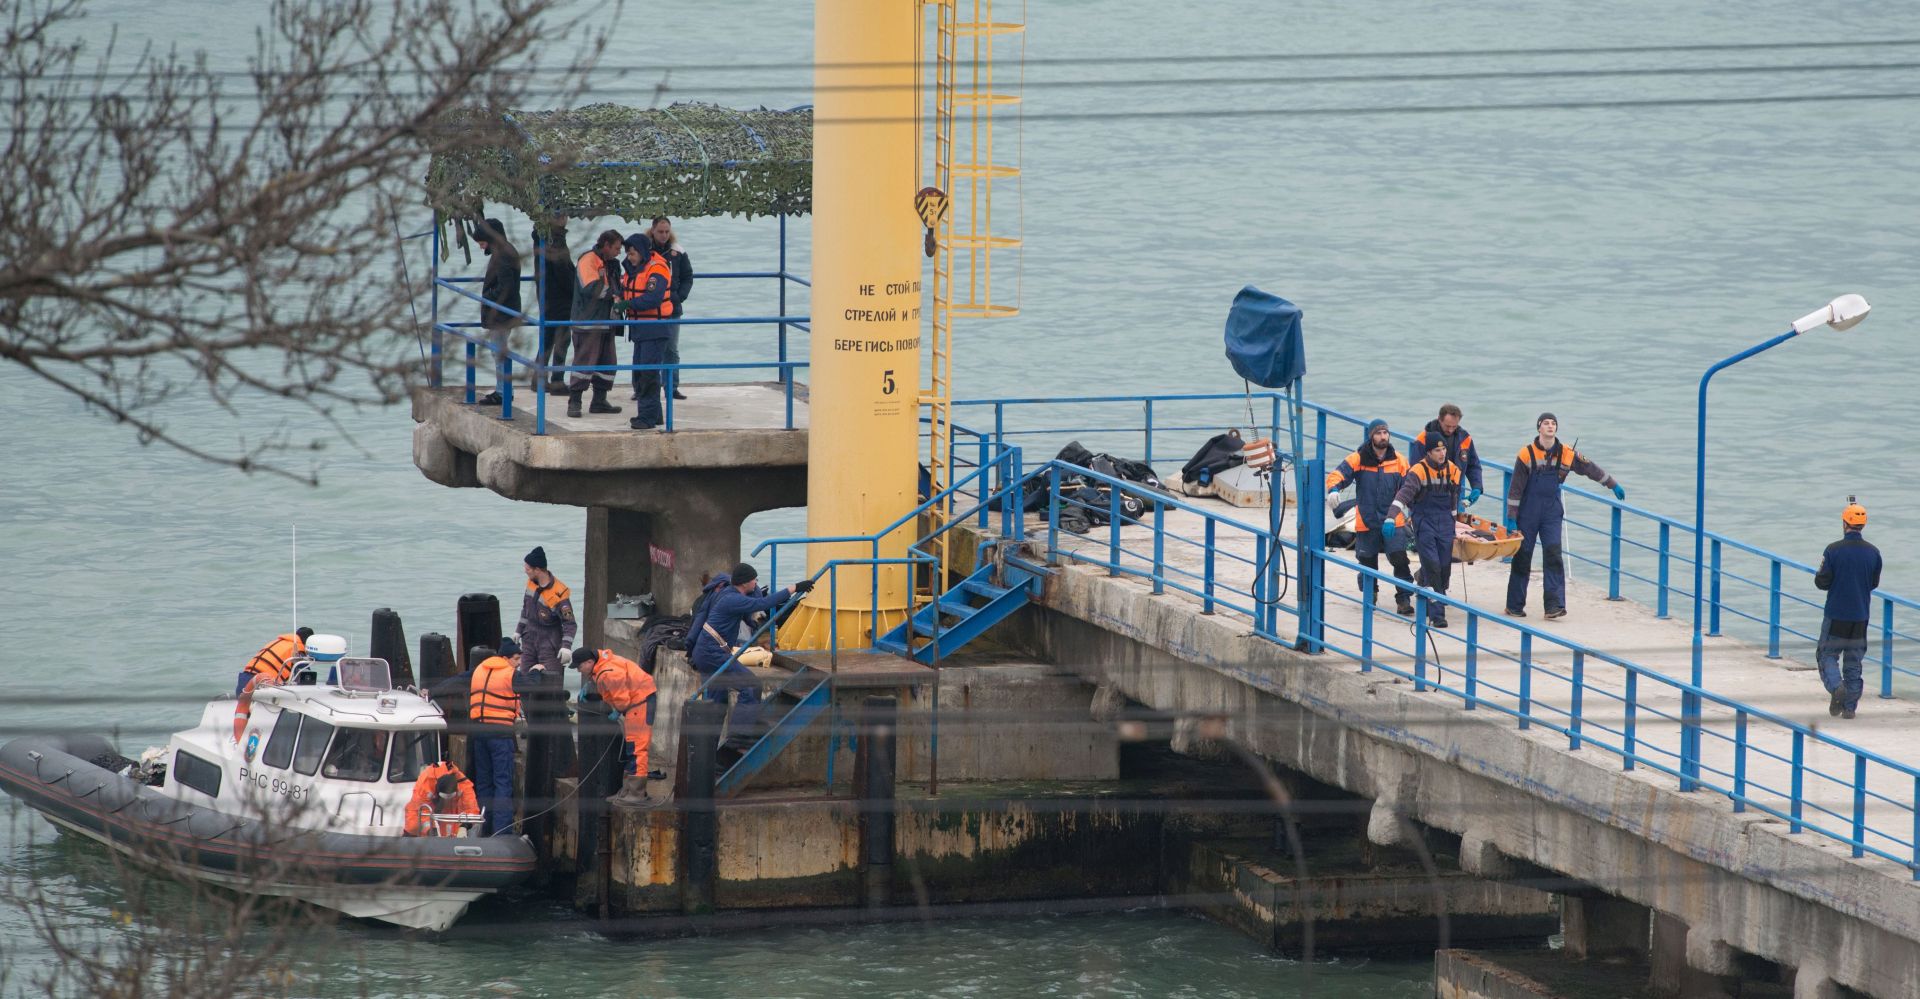 epa05687862 Rescuers unload fragments and remains from a boat, found at the site of the Tu-154 plane crash near Sochi, Russia, 25 December 2016. According to media reports, a Tupolev-154 Russian airplane carrying at least 92 people disappeared from radar and crashed into the Black Sea after taking off from an airport in Sochi on 25 December. The plane which was flying to Latakia, Syria, was reportedly carrying 65 members of the Alexandrov Ensemble, eight crew members, nine Russian journalists as well as Russian civil activist, Doctor Yelizaveta Glinka (Doctor Liza).  EPA/YEVGENY REUTOV